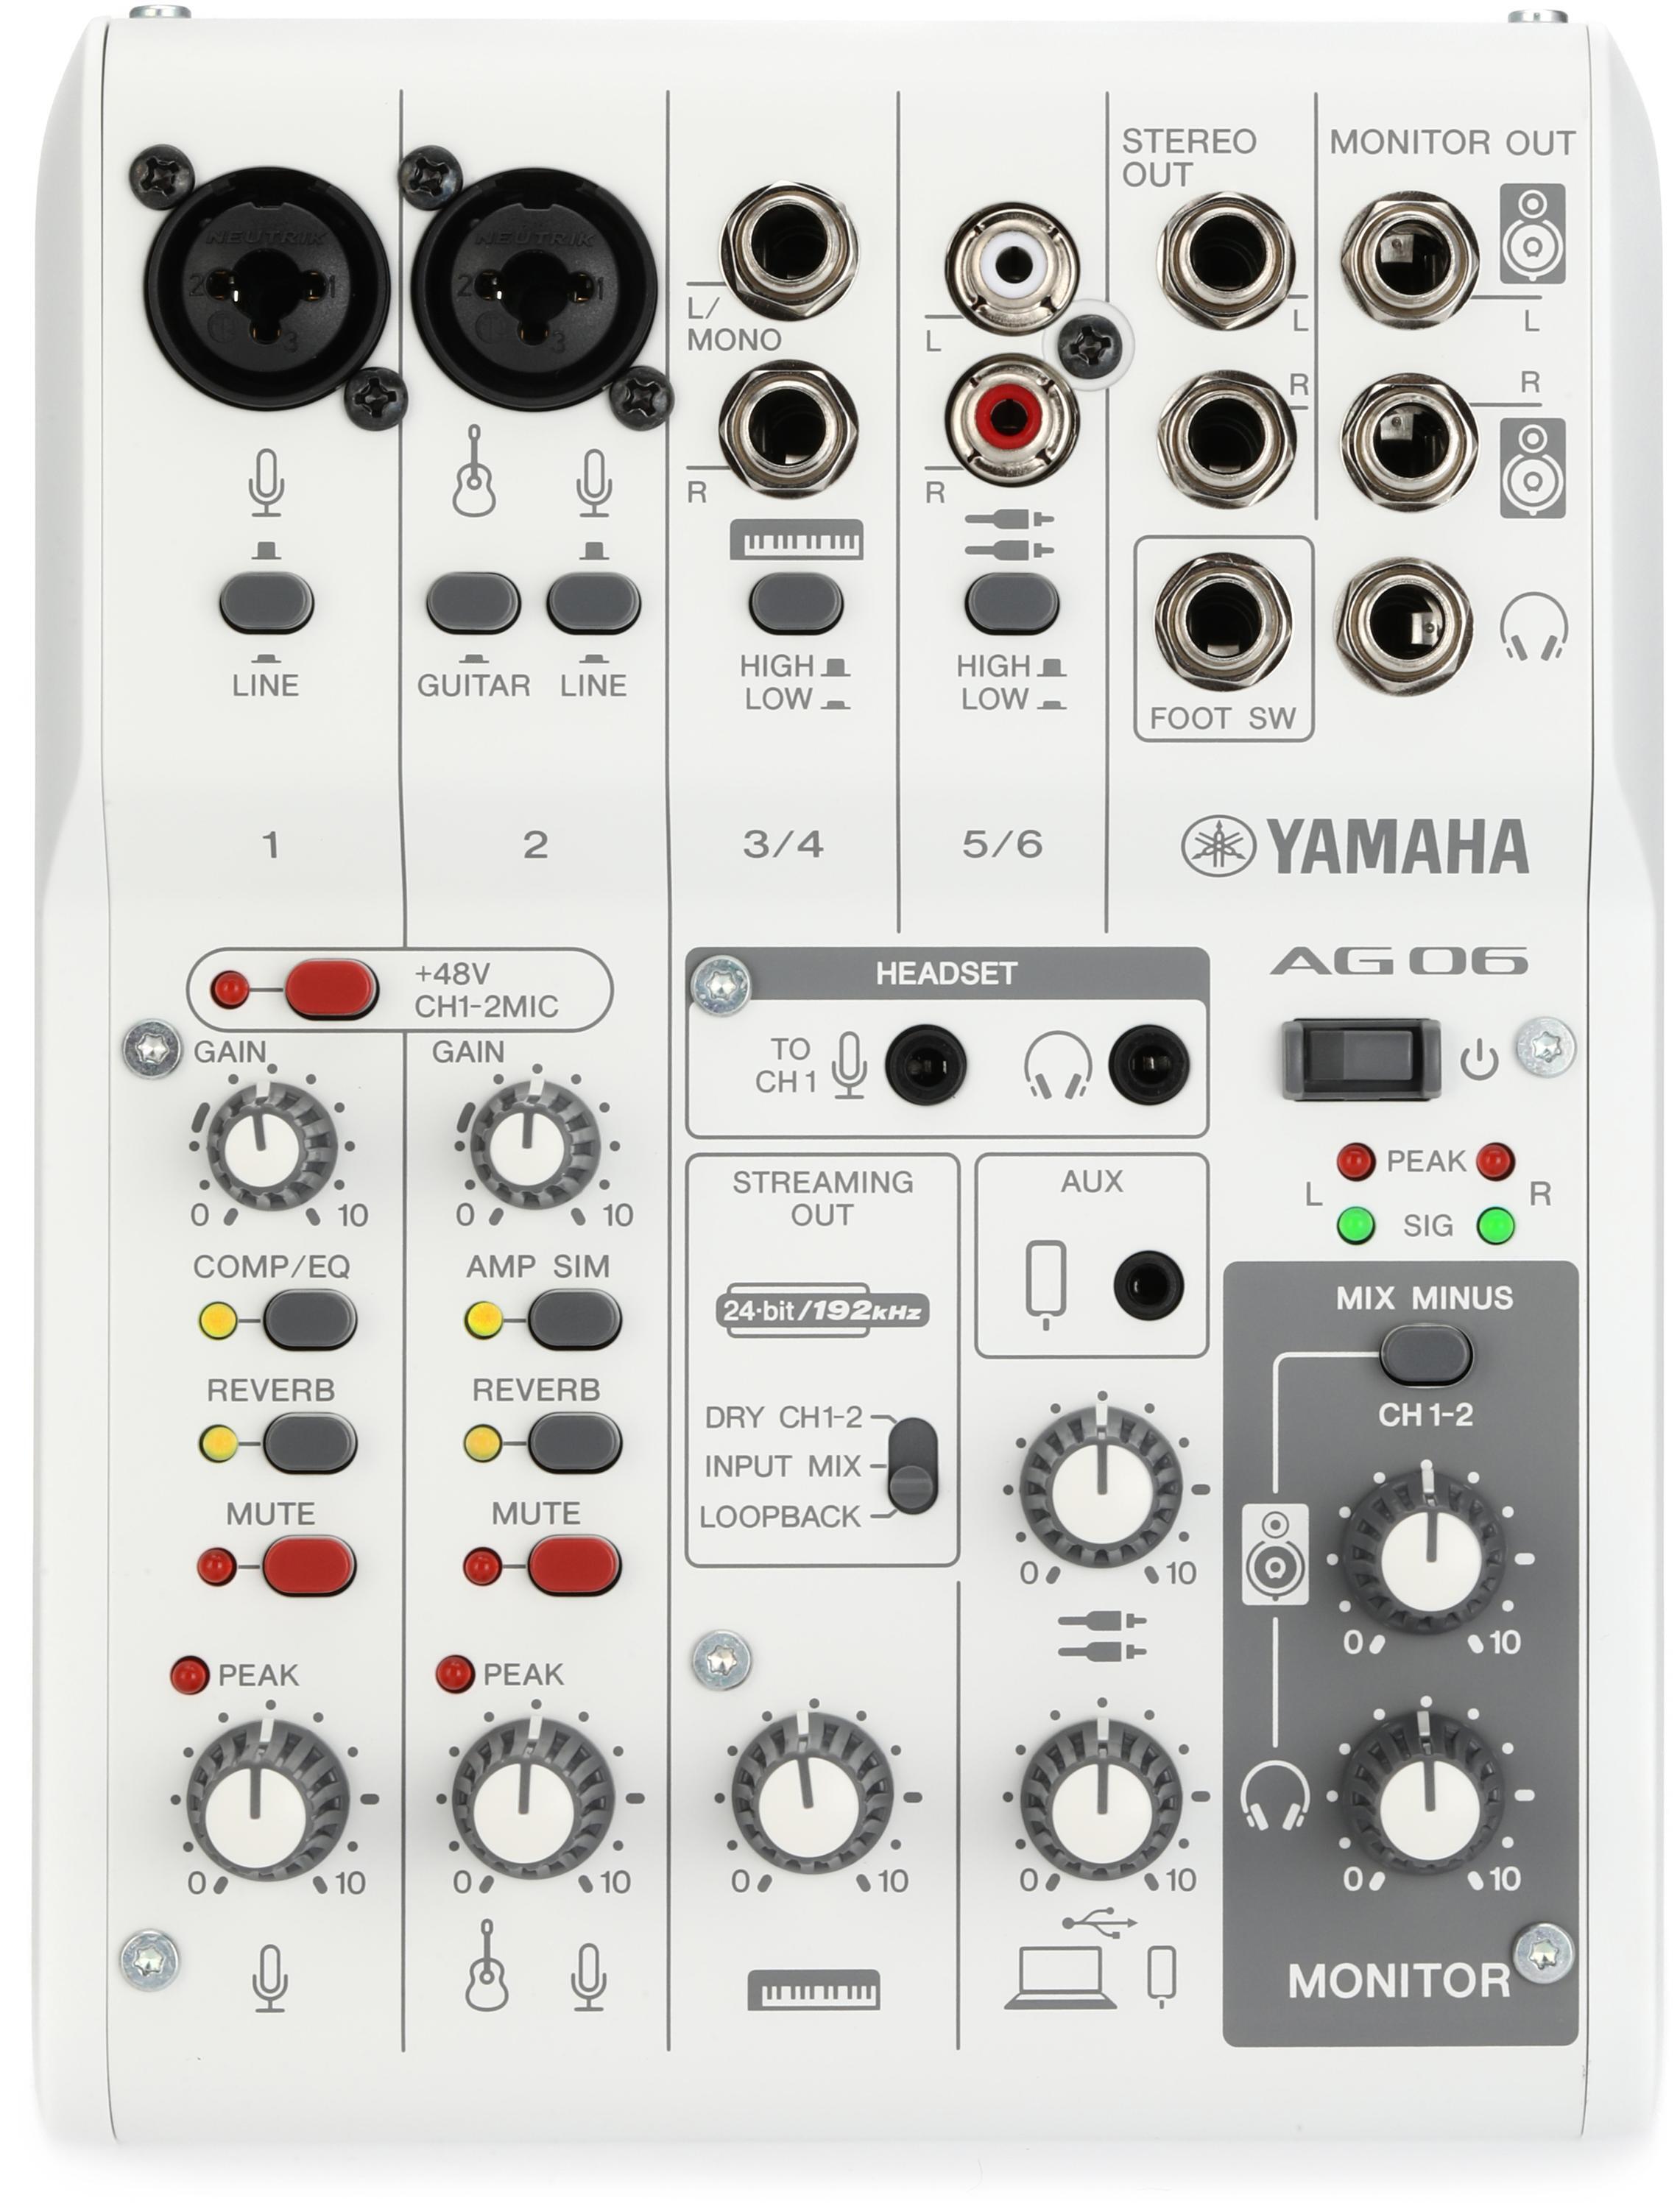 USB　Mixer　White　Interface　Sweetwater　and　Audio　Mk2　AG06　Yamaha　6-channel